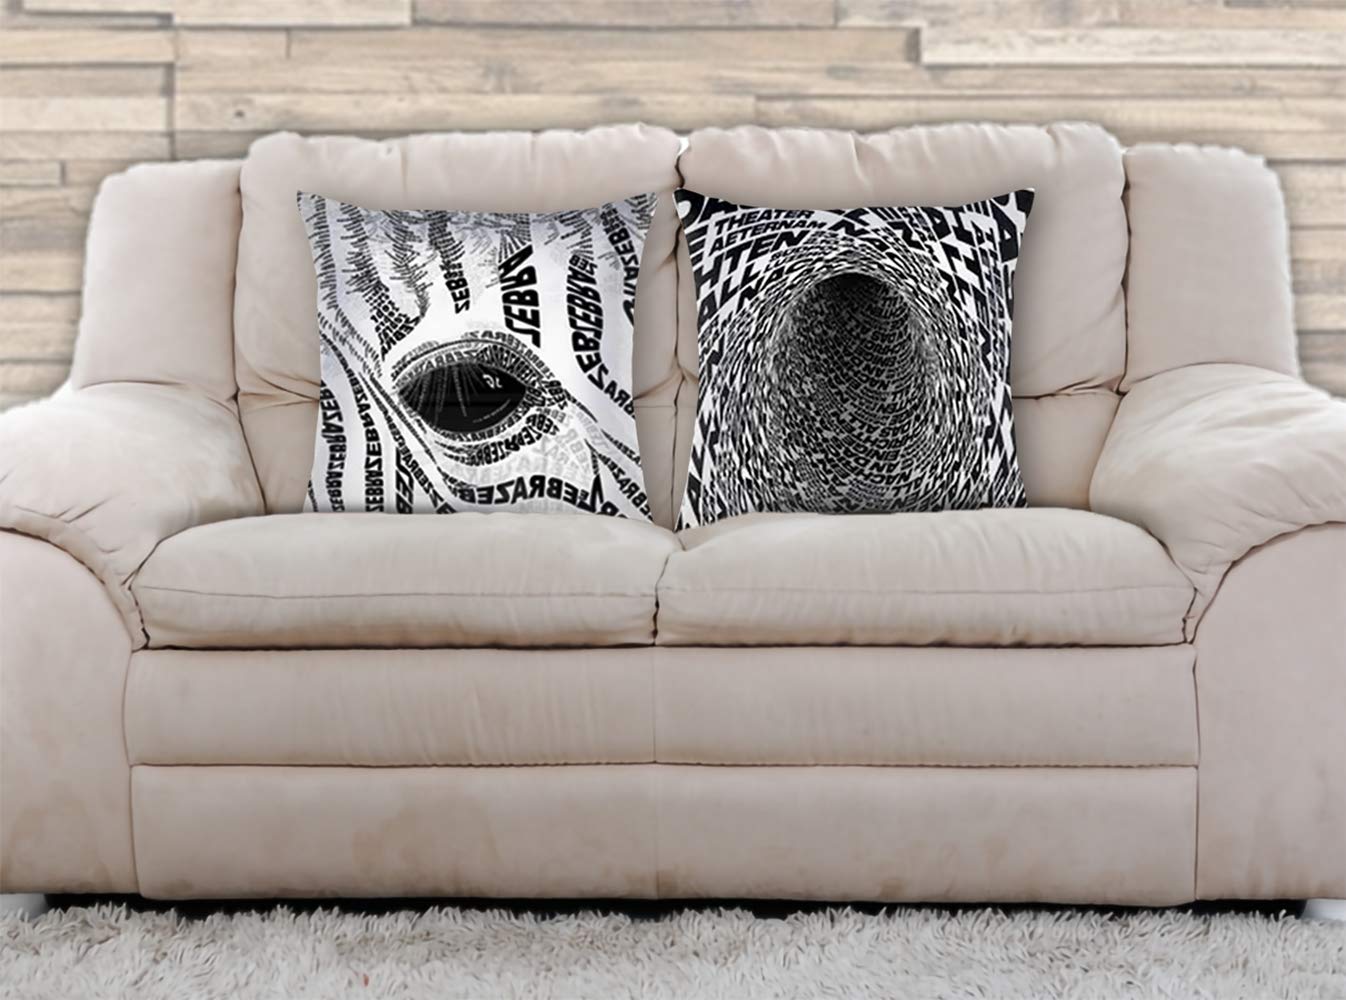 AAYU Black and White Zebra Decorative Throw Pillow Covers 18 x 18 Inch Set of 2 Linen Cushion Covers for Couch Sofa Bed Home Decor